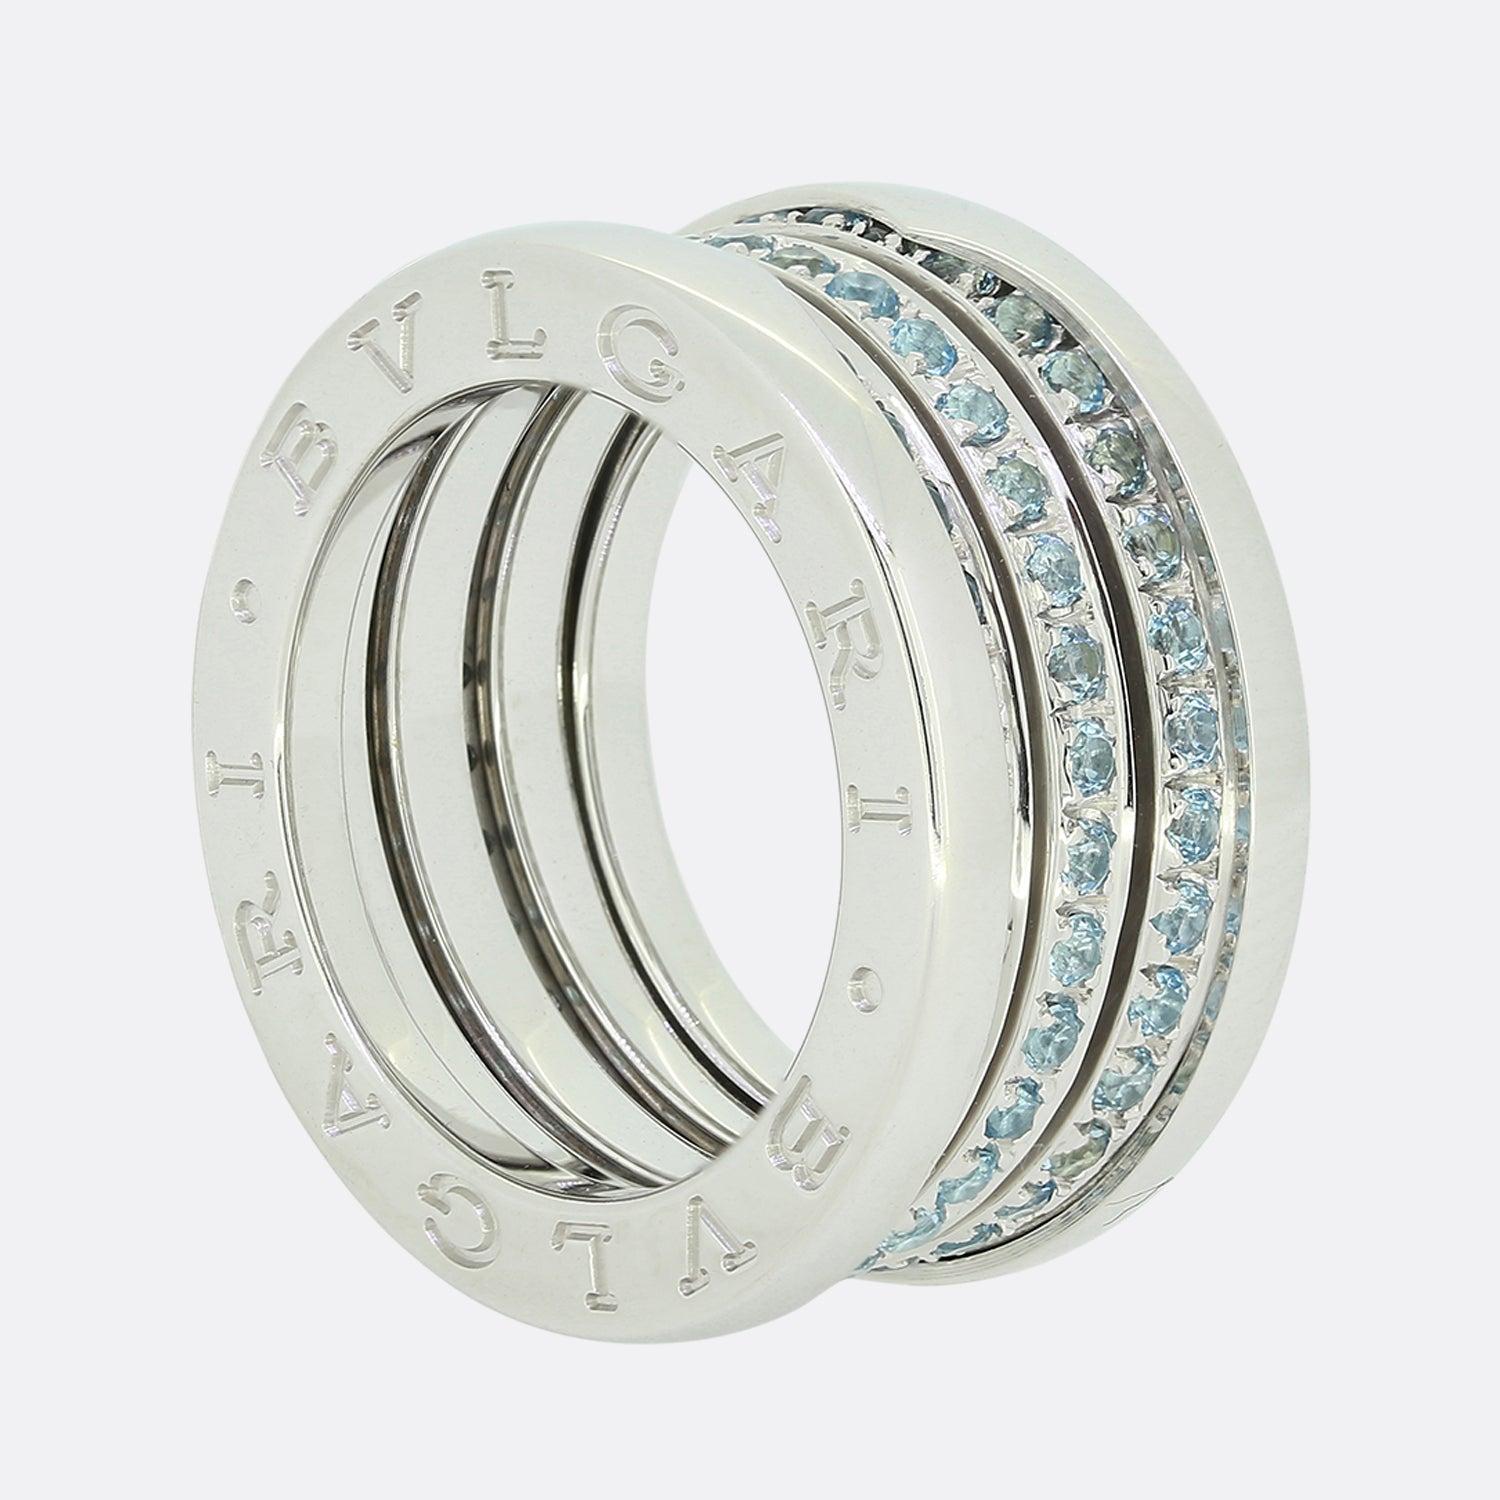 This is an excellently crafted B.Zero1 ring from the world renowned Italian jewellery house of Bvlgari. It has been crafted from 18ct white gold and features middle bands set with blue topaz between a raised border engraved with 'Bvlgari' details.